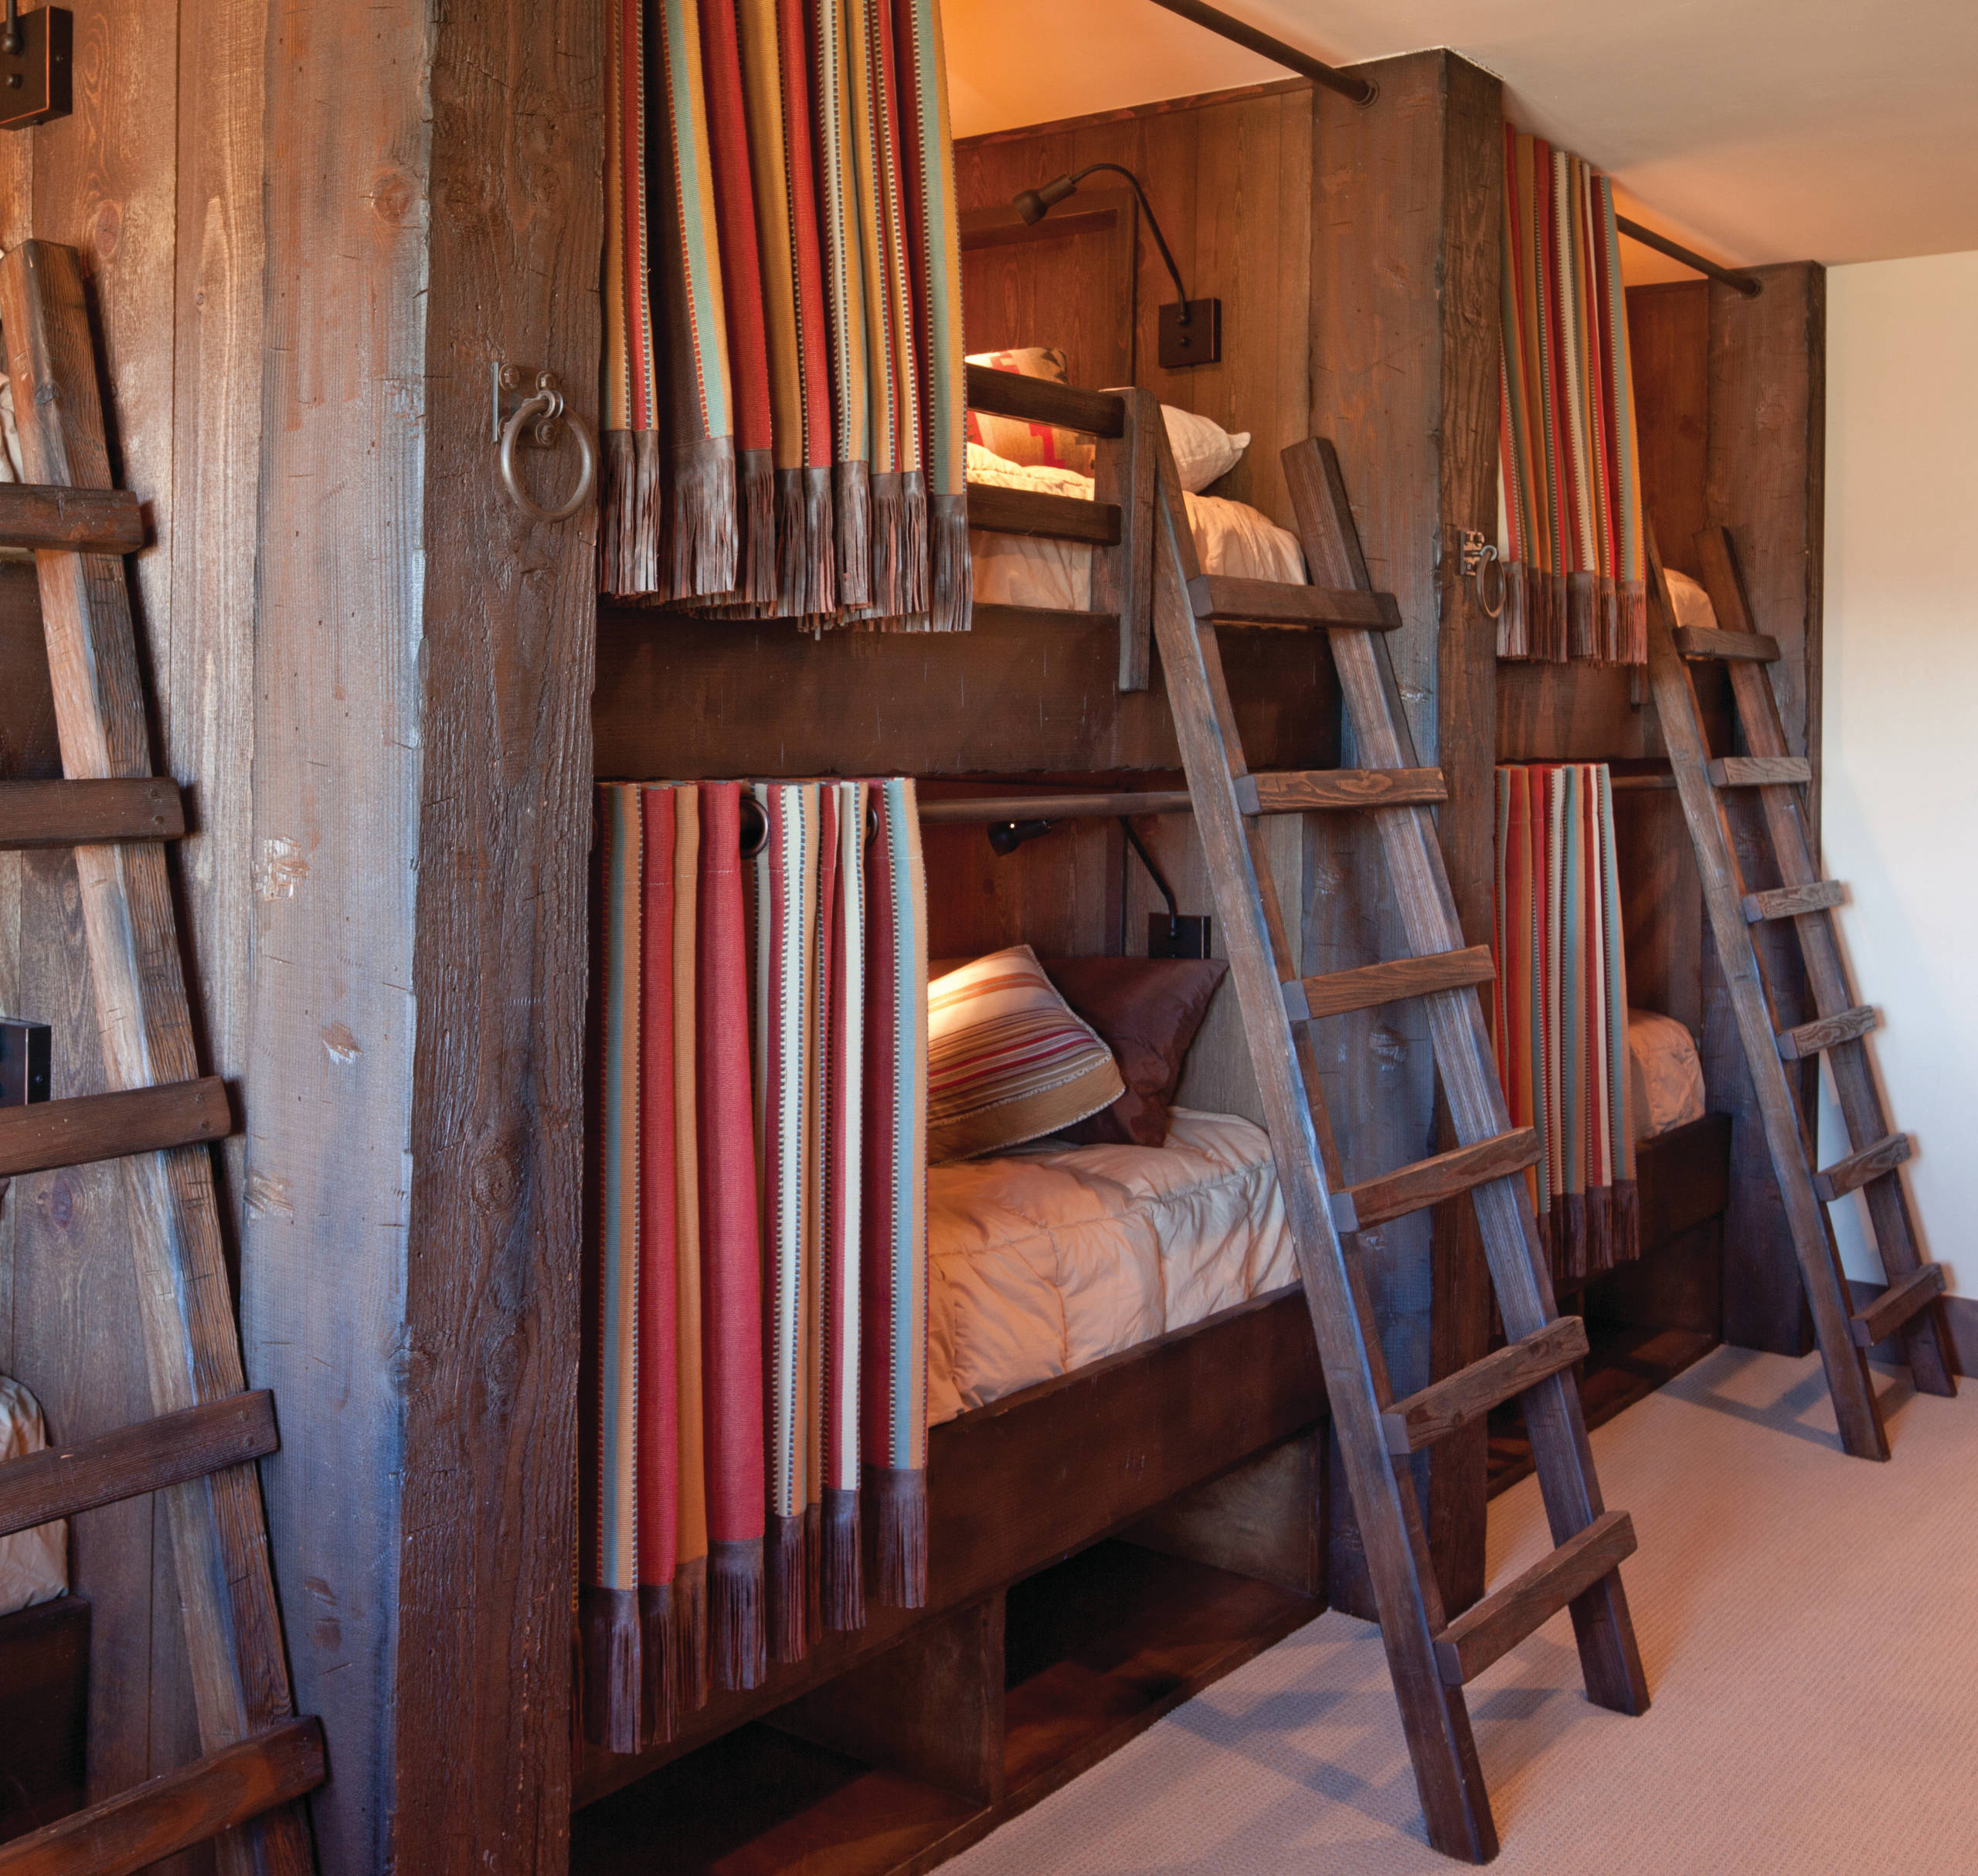 Rustic Cabin Bunk Bed Houzz, Bunk Bed Ideas For Cabins